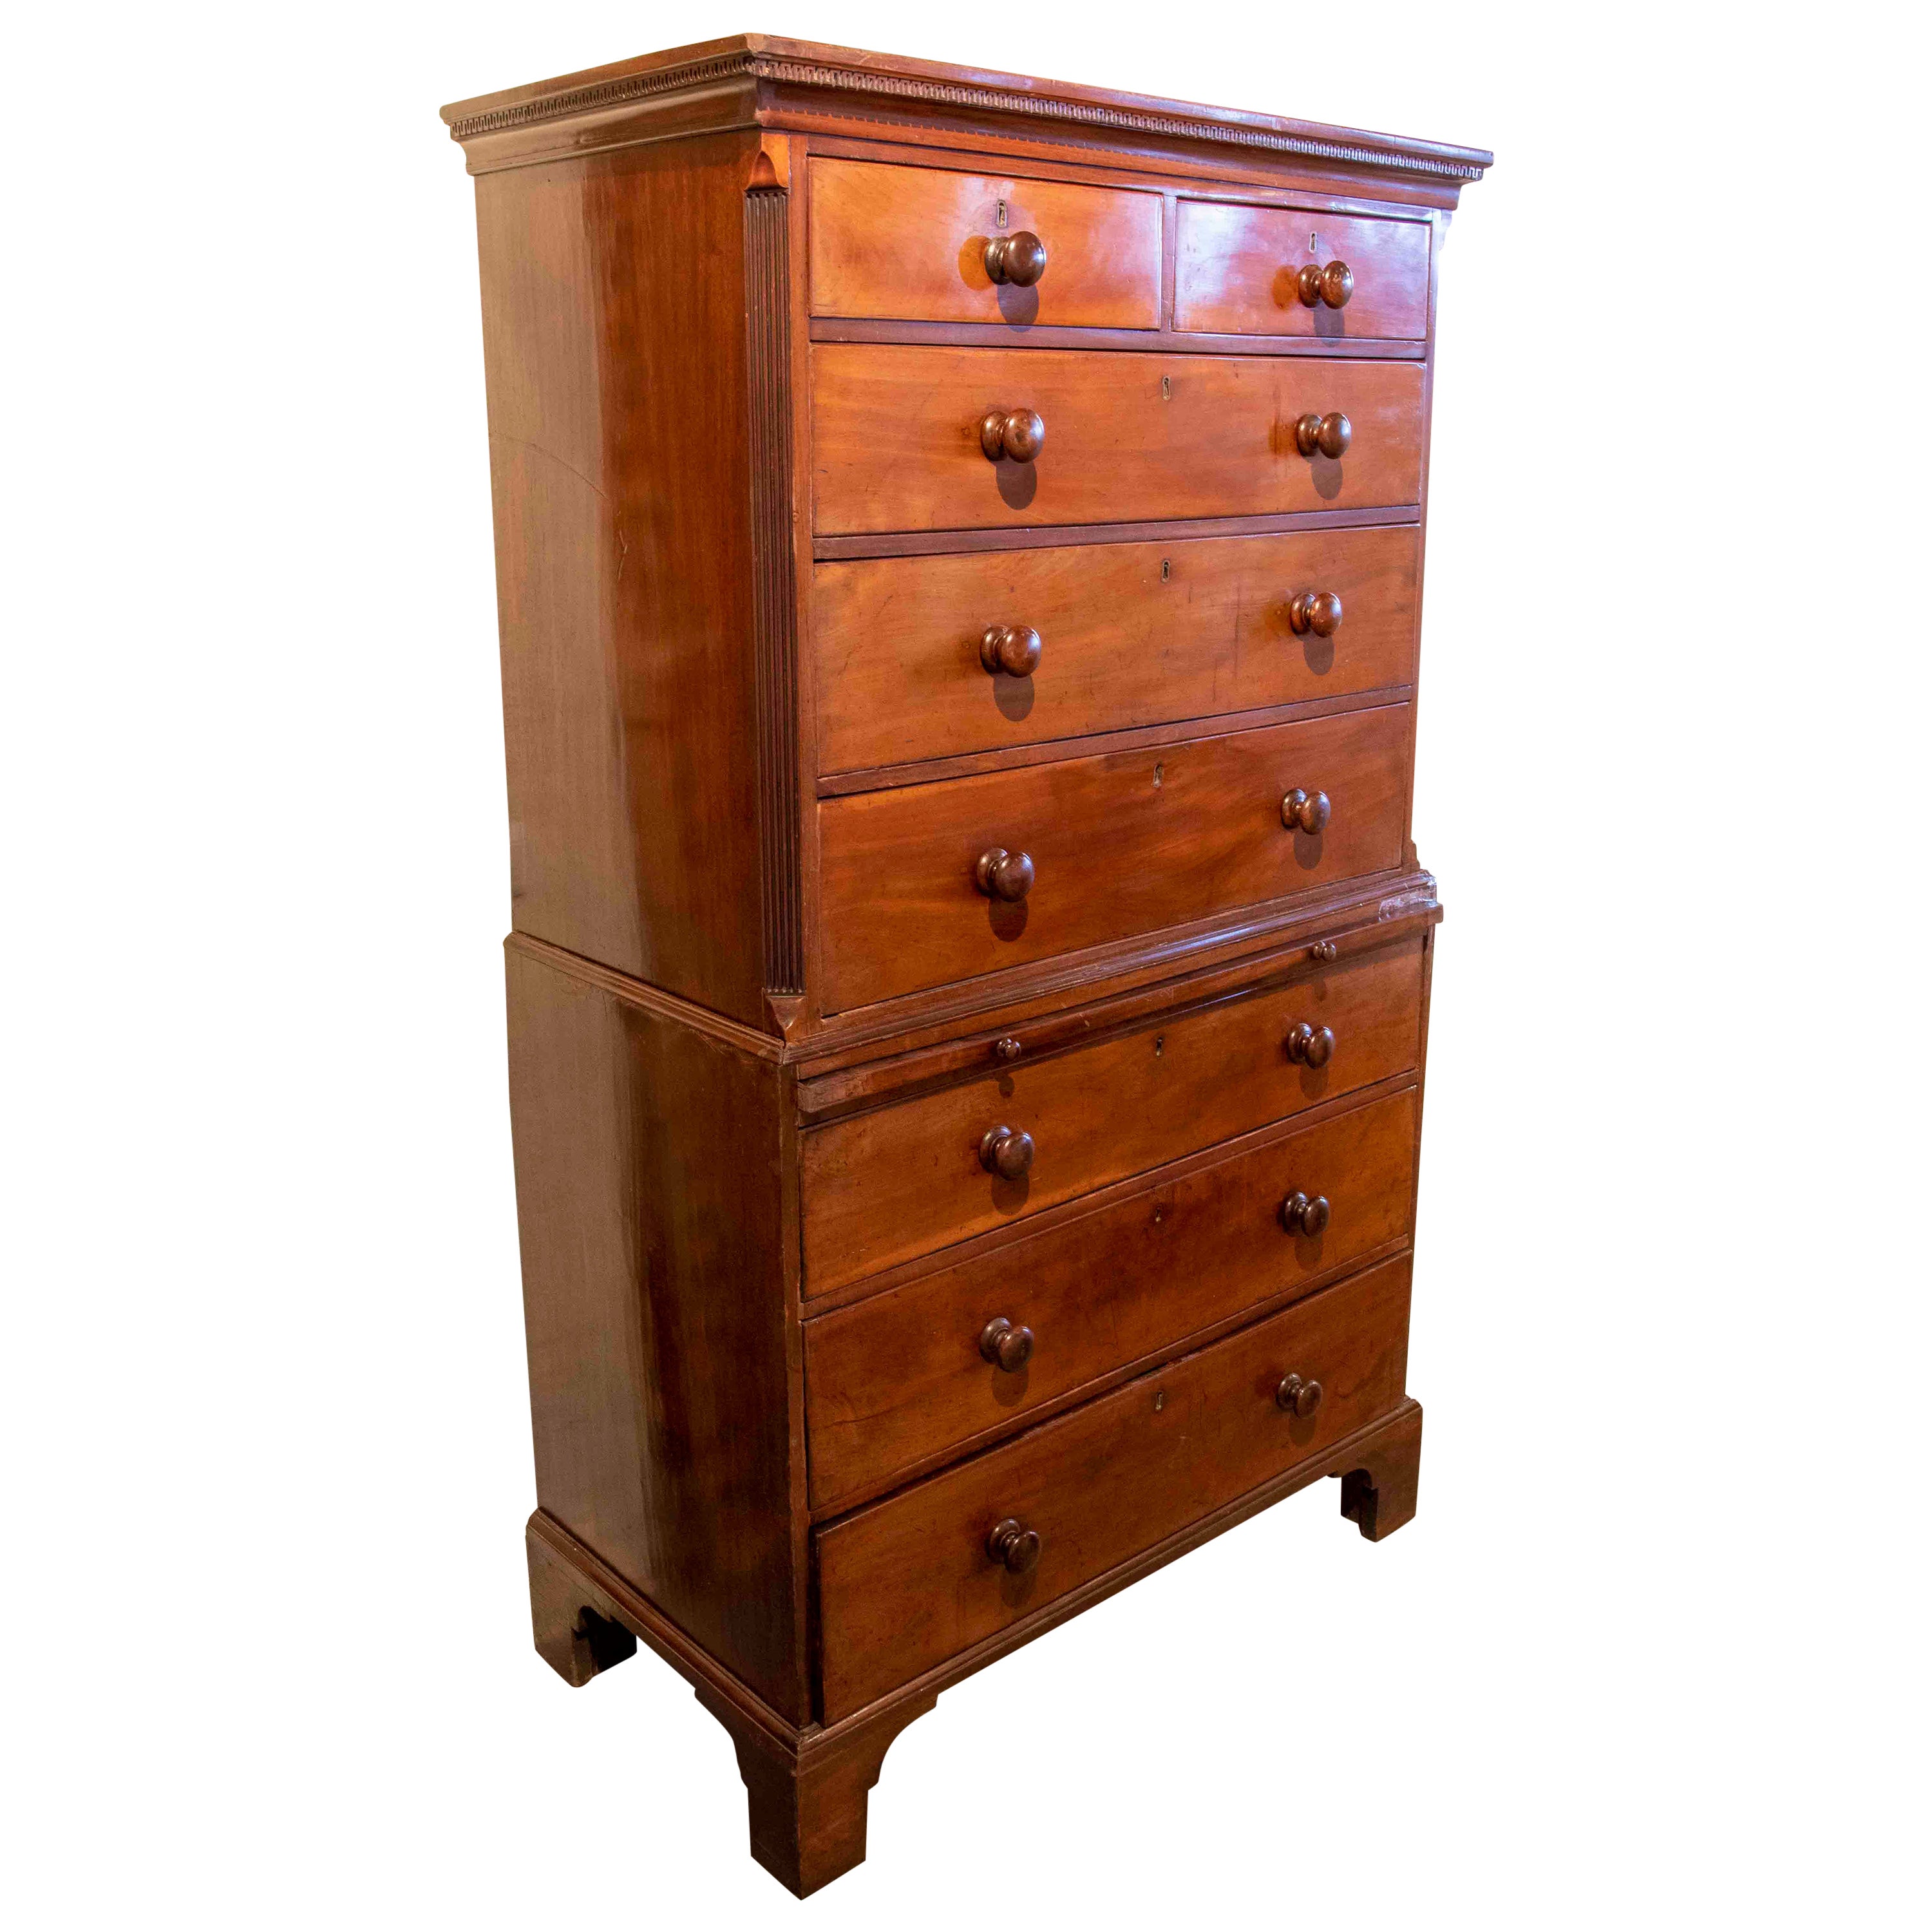 19th Century Chest of Drawers - English Mahogany Two-body Desk For Sale